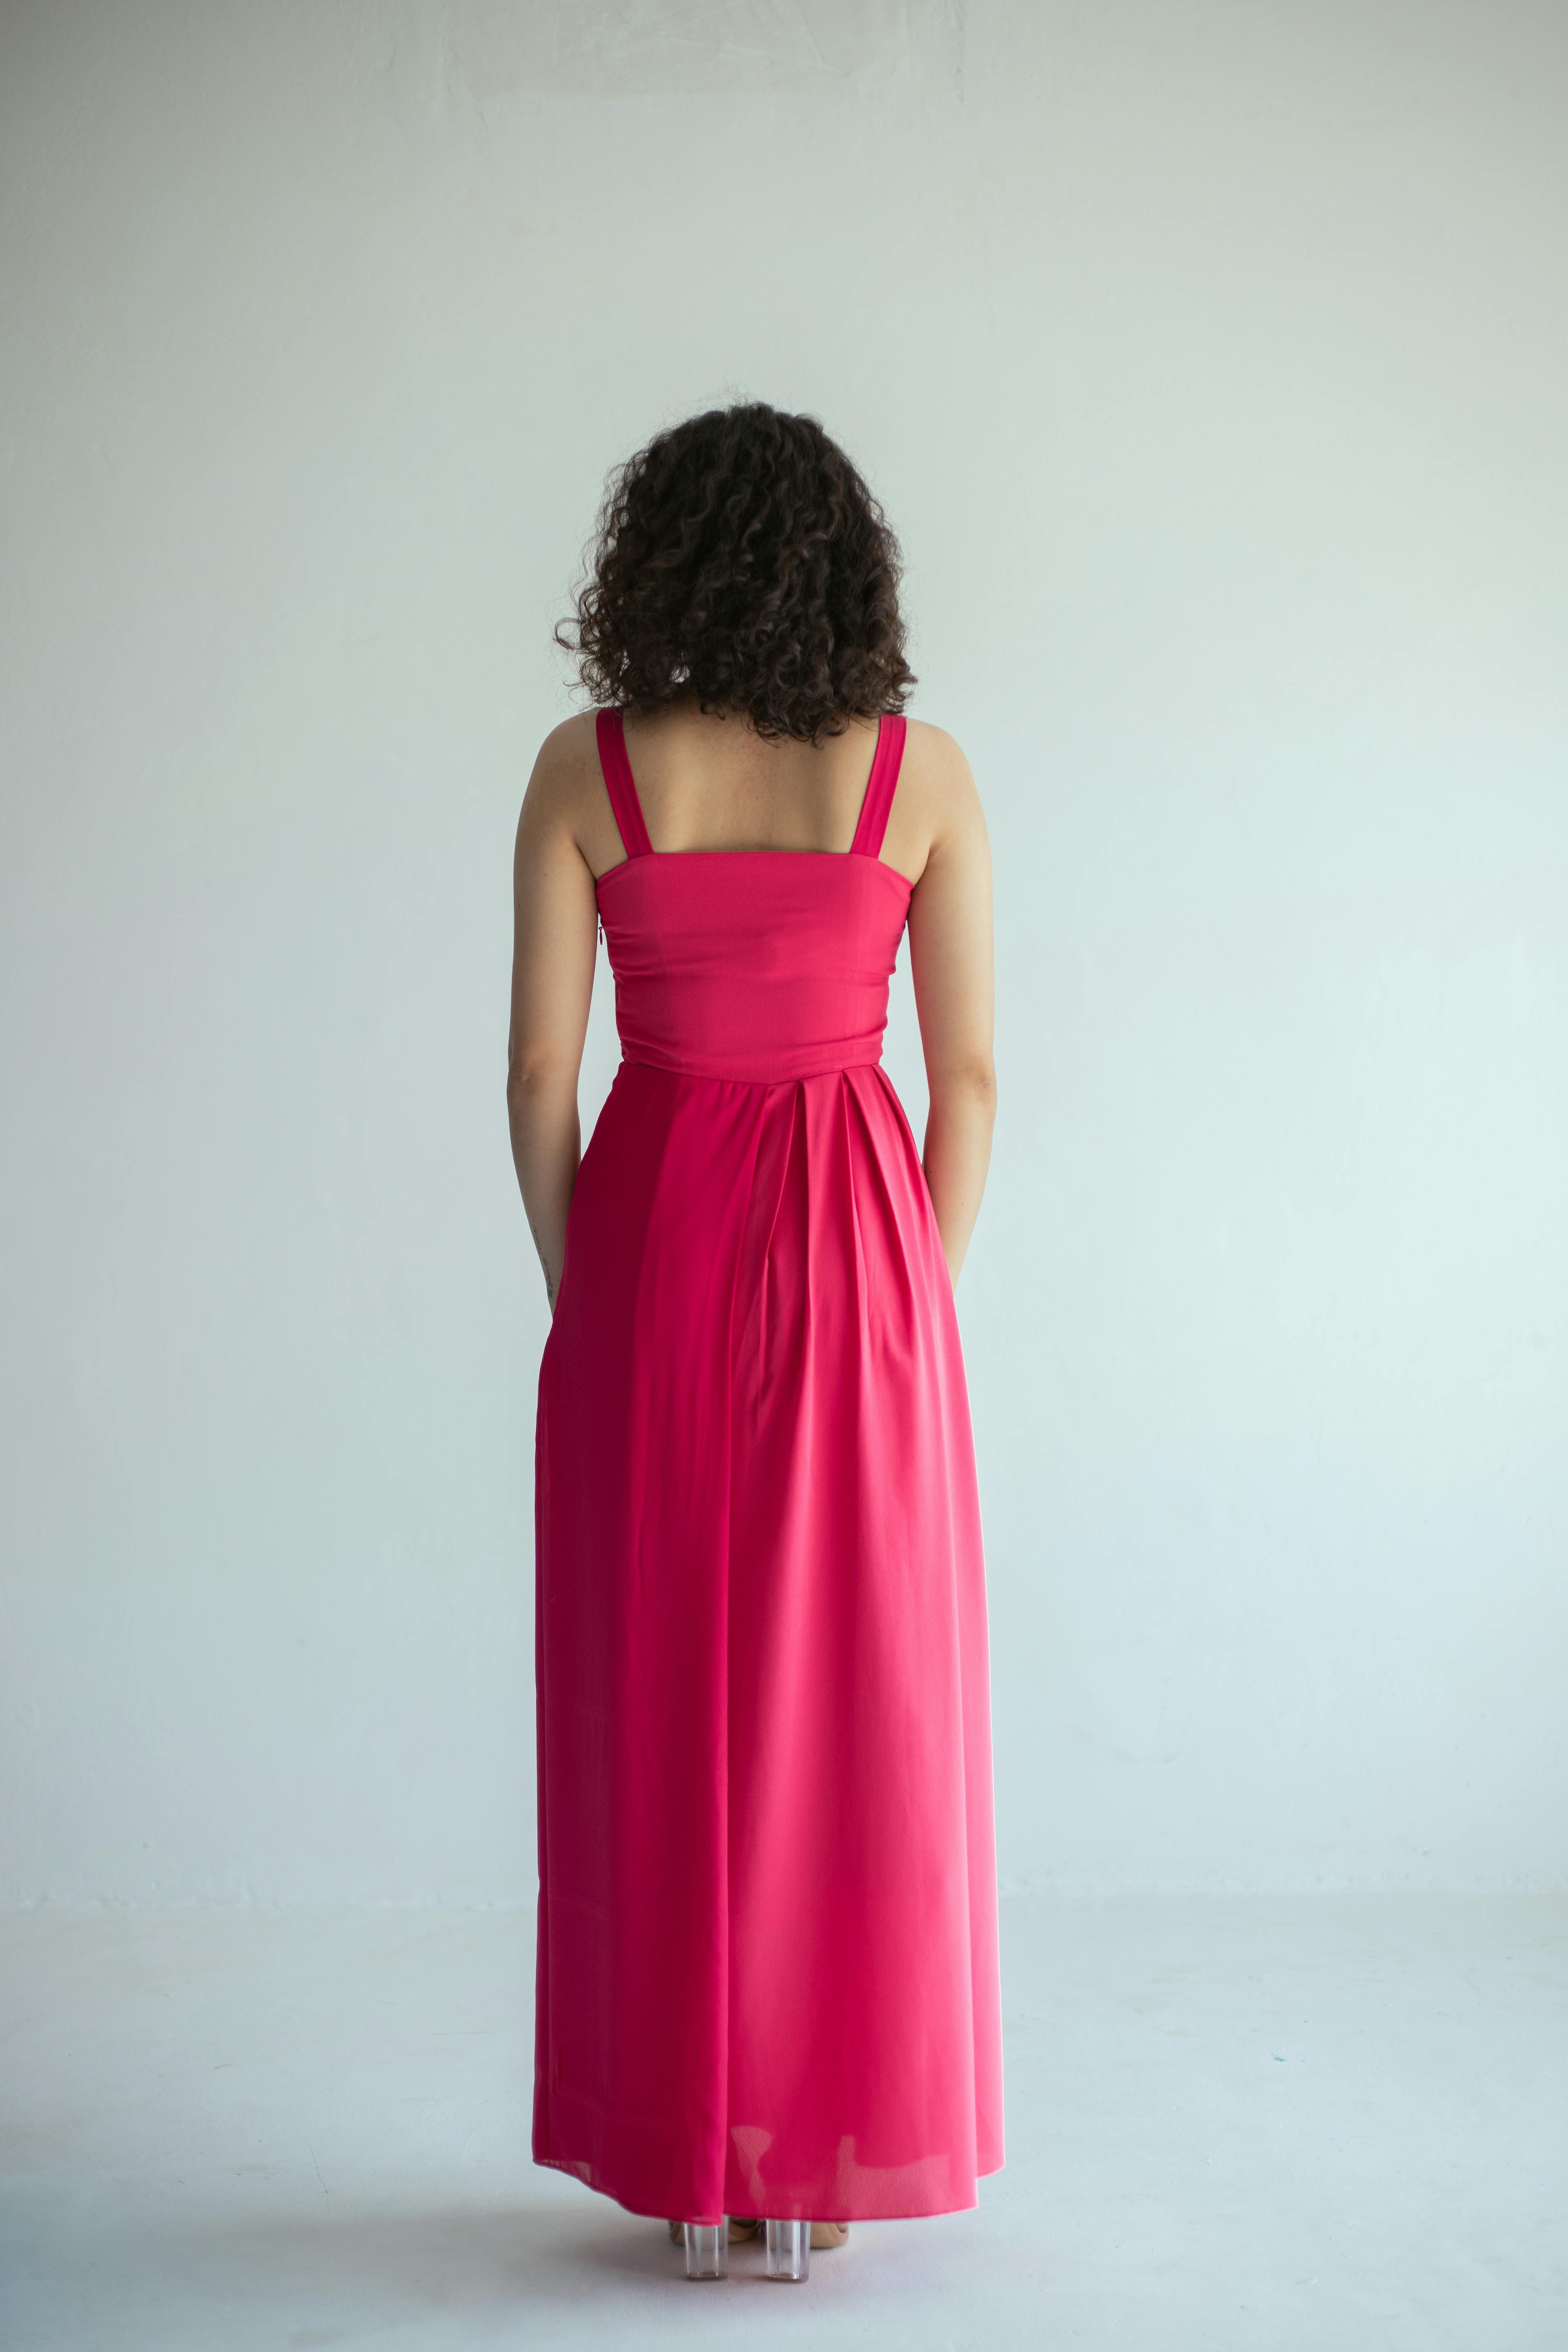 Thumbnail preview #4 for Dual Toned Pink Maxi Dress 